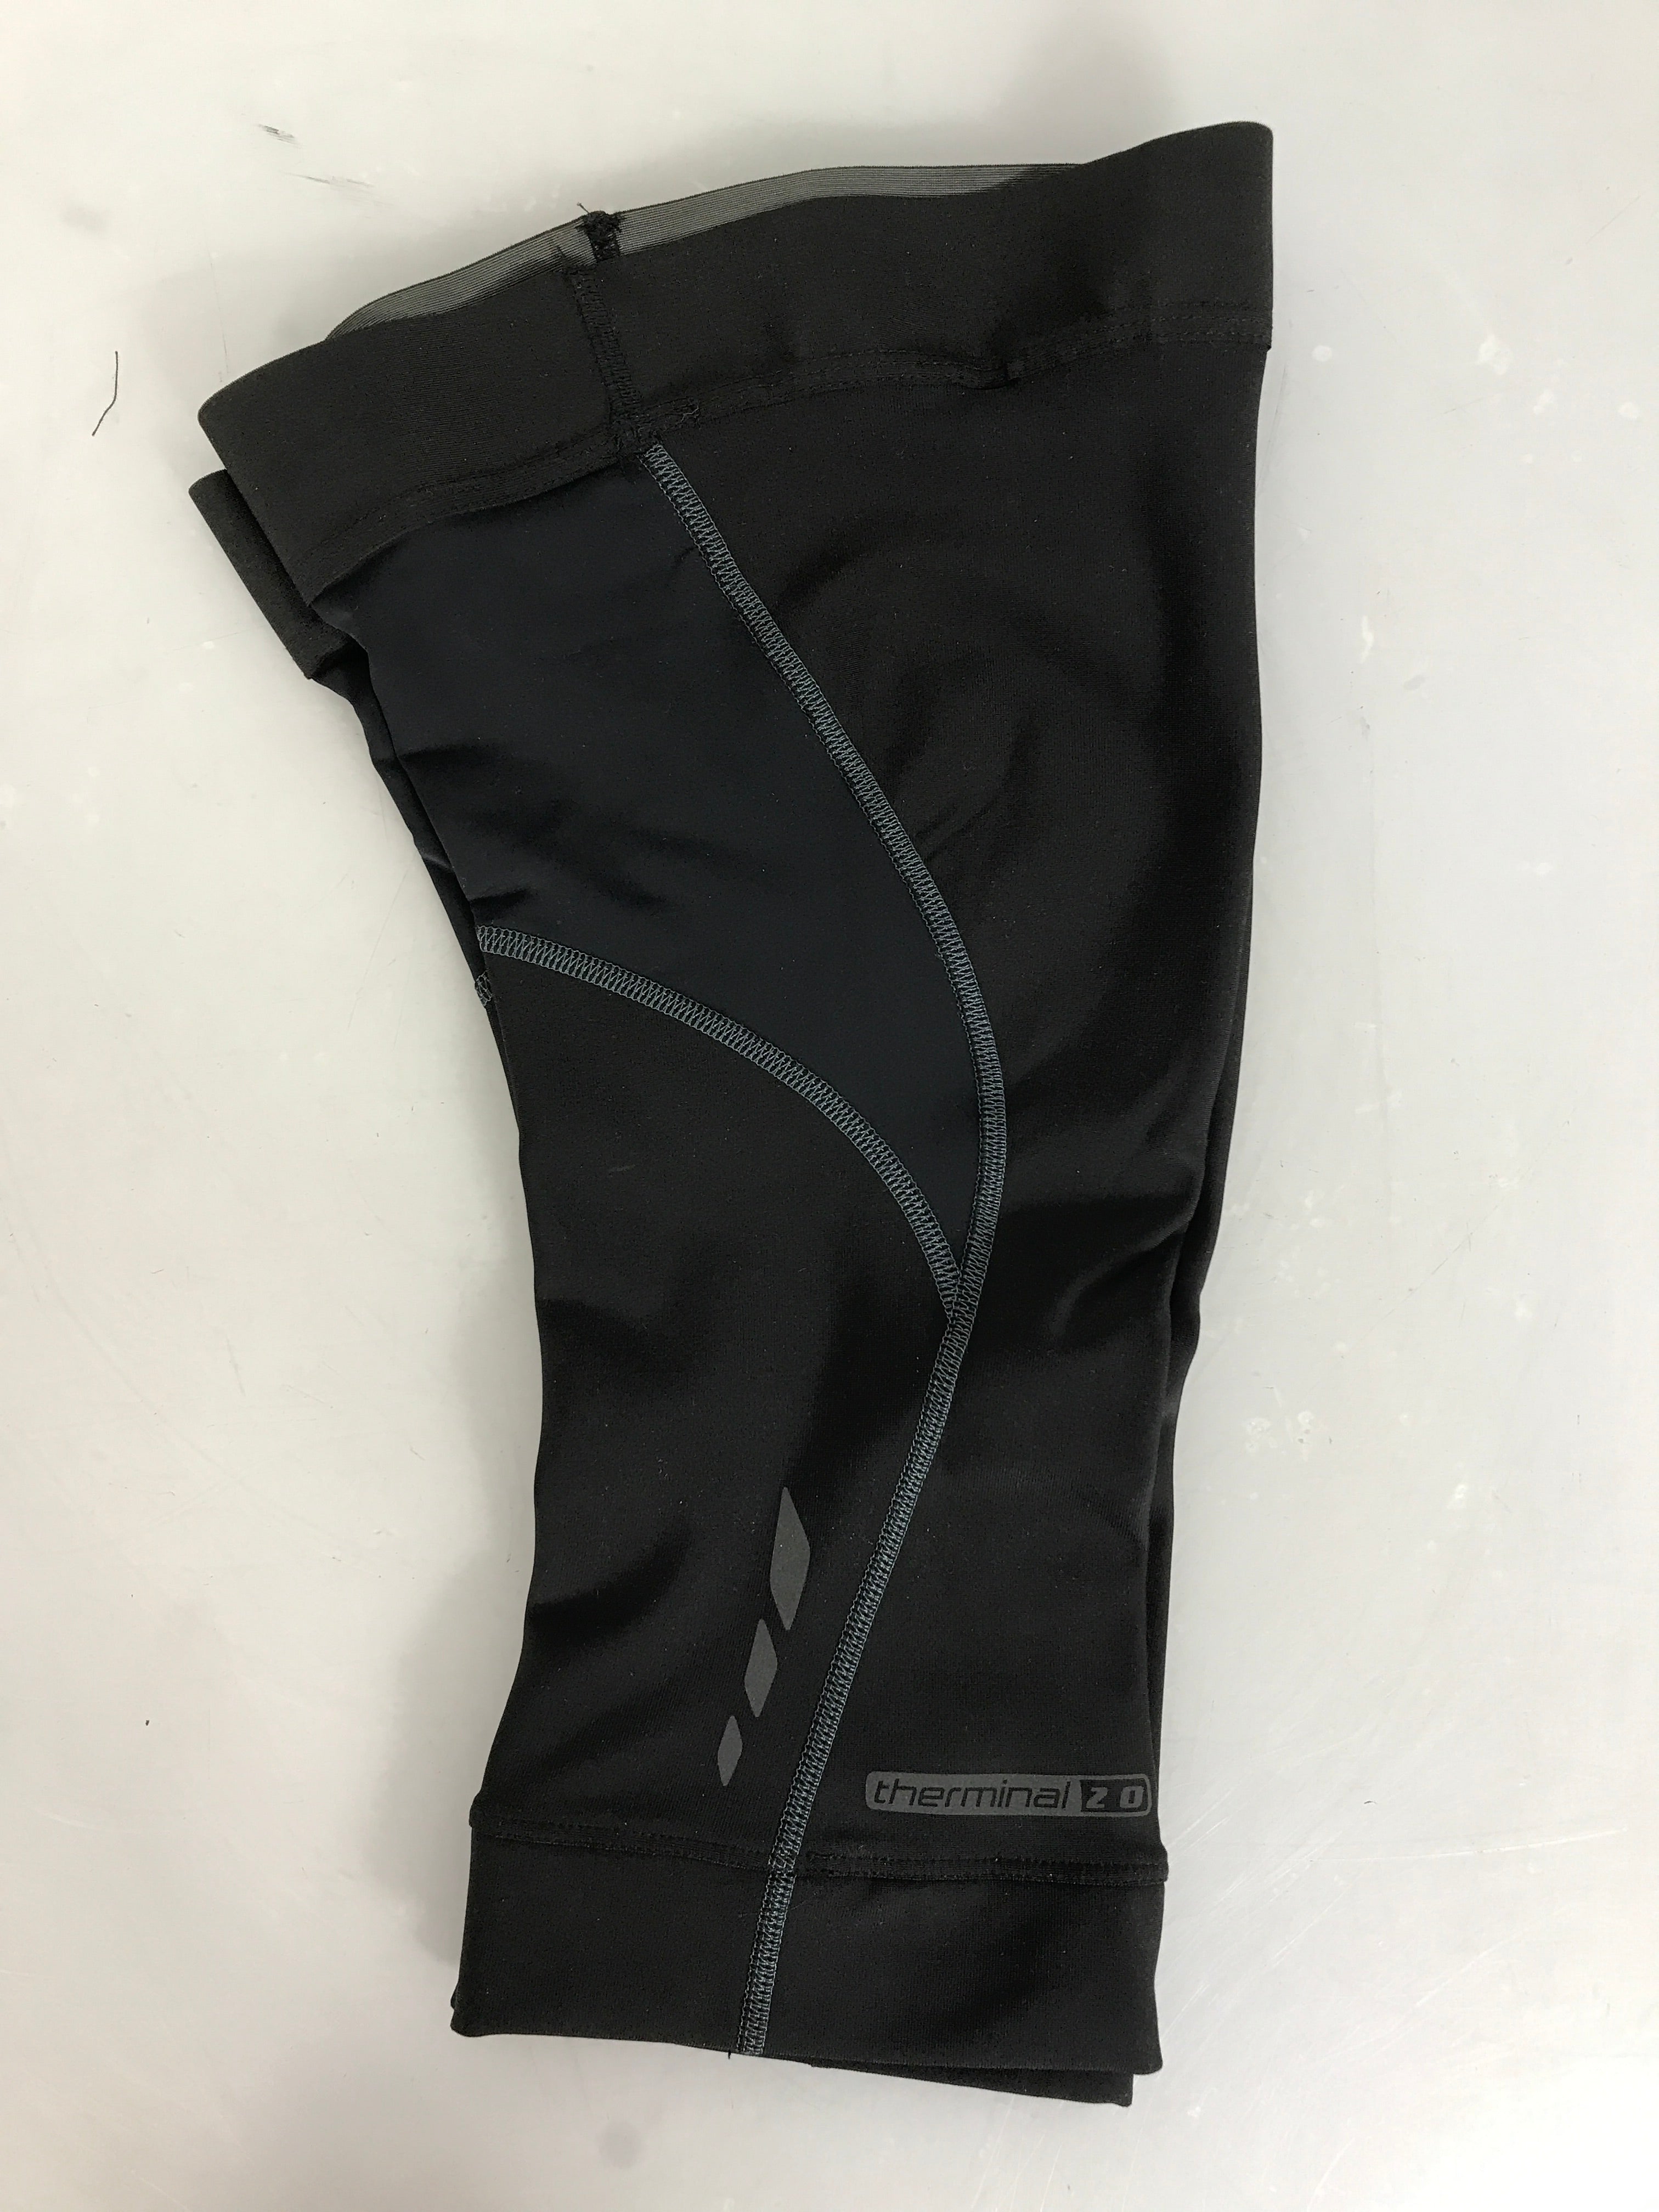 Specialized Therminal 2.0 Black Knee Warmers Women's Size S NWT